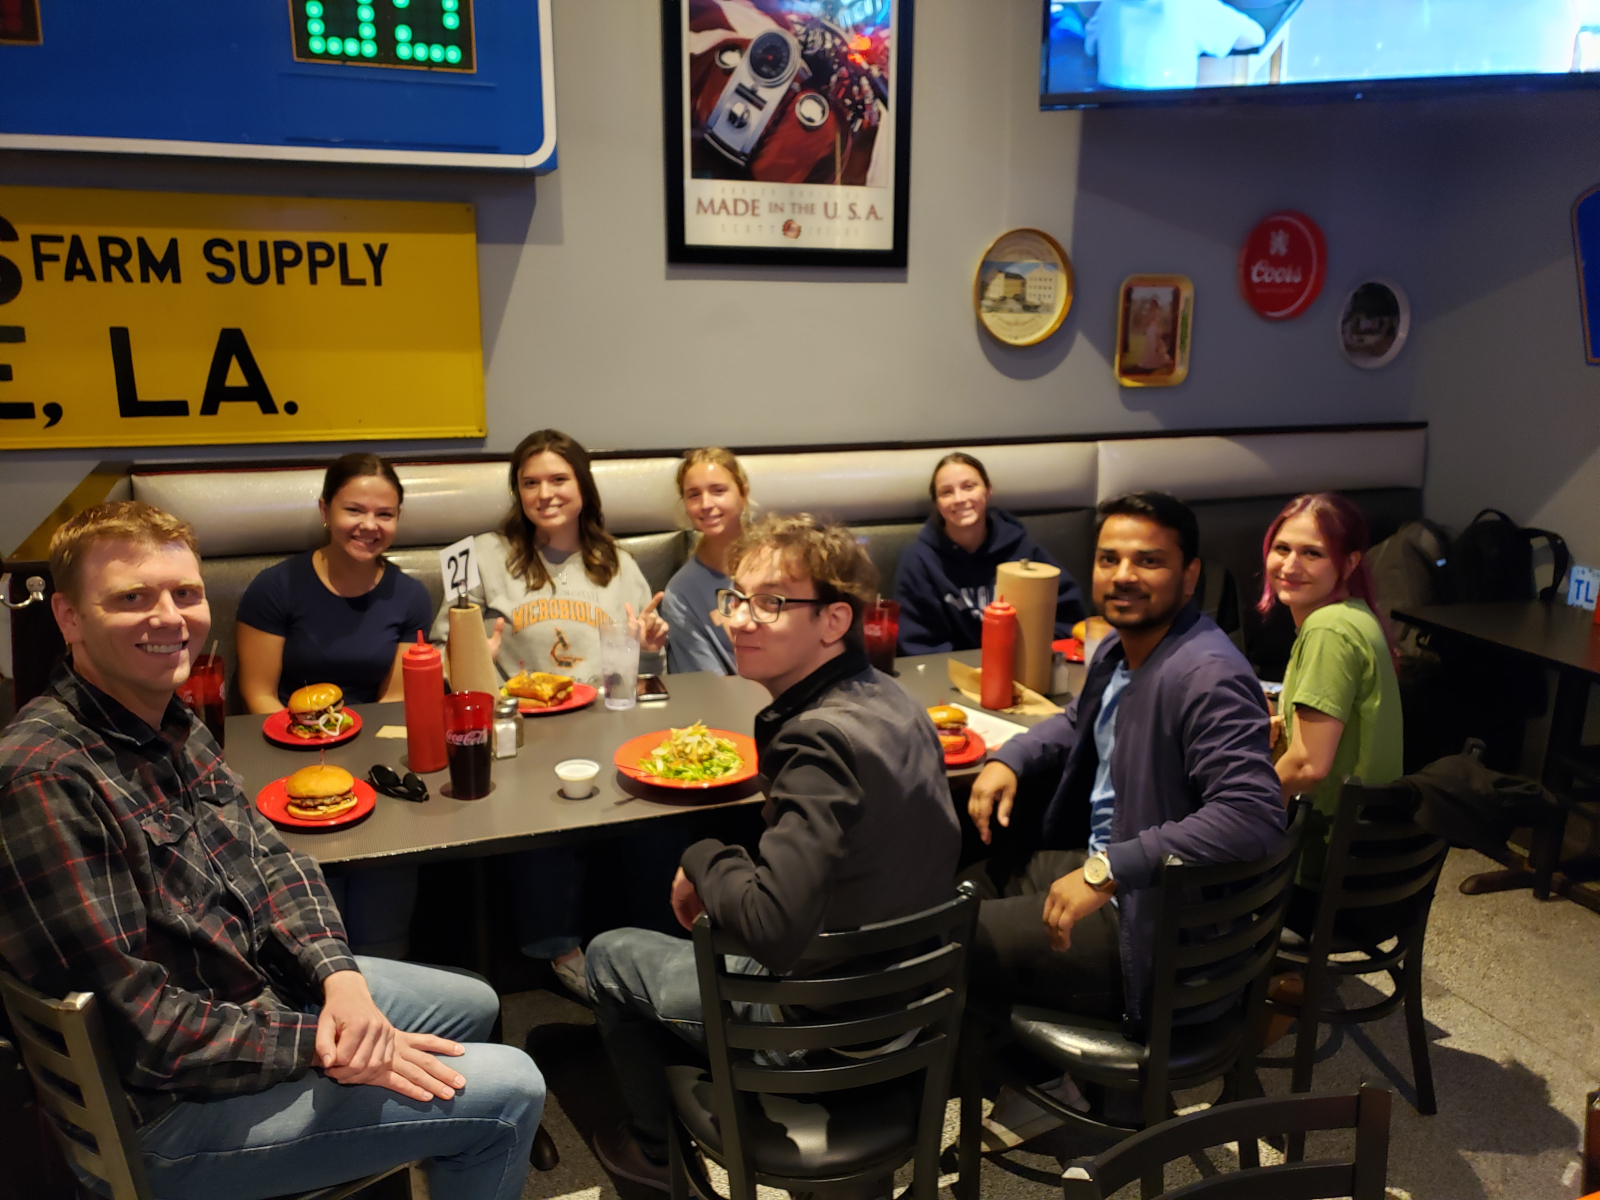 Photograph of Reed, Reagan, Claire, Addison, Landry, Alex, Mehraj, and Paul at the Garage eating lunch.